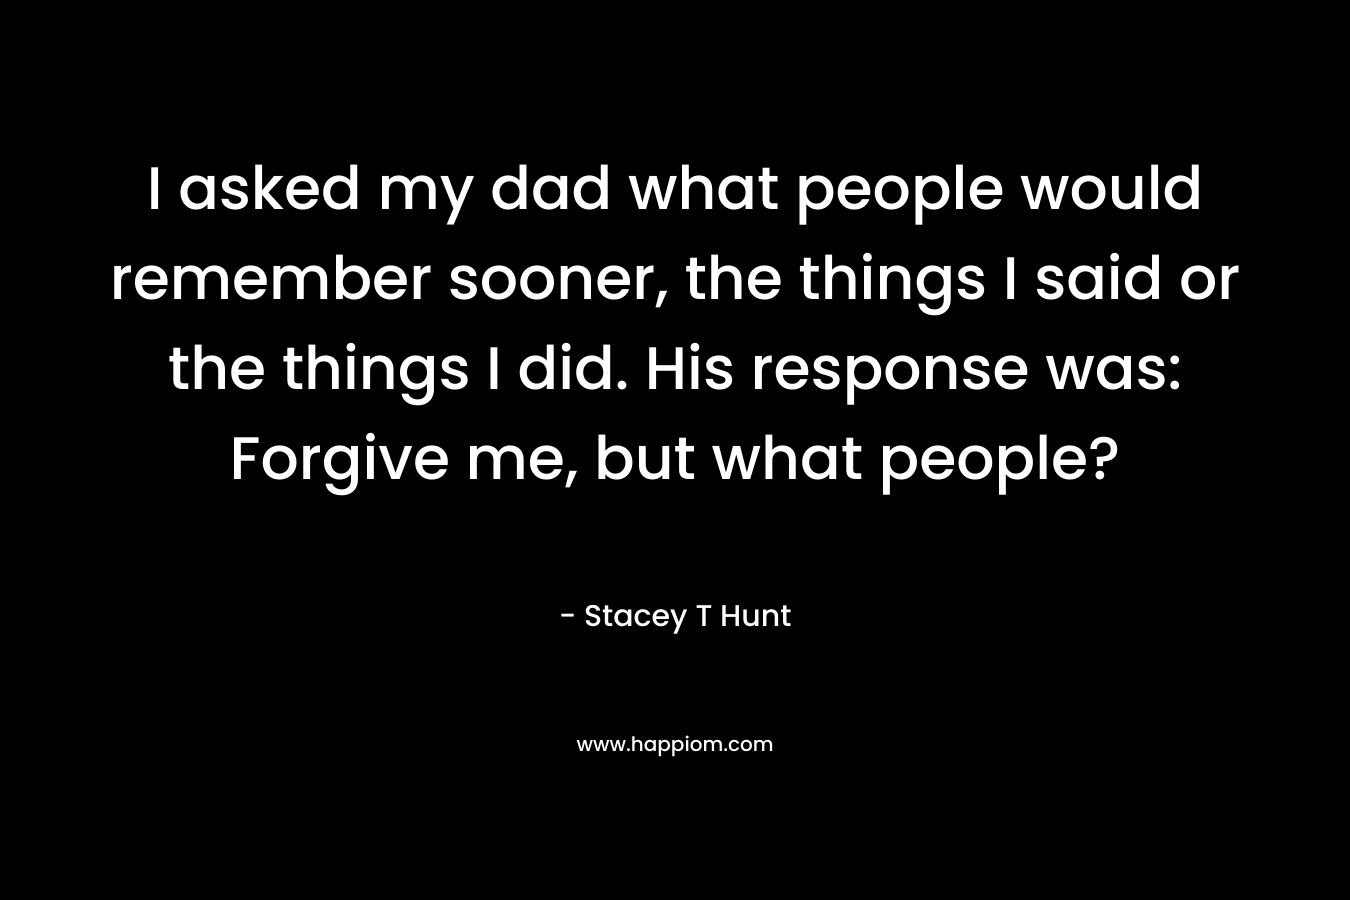 I asked my dad what people would remember sooner, the things I said or the things I did. His response was: Forgive me, but what people? – Stacey T Hunt